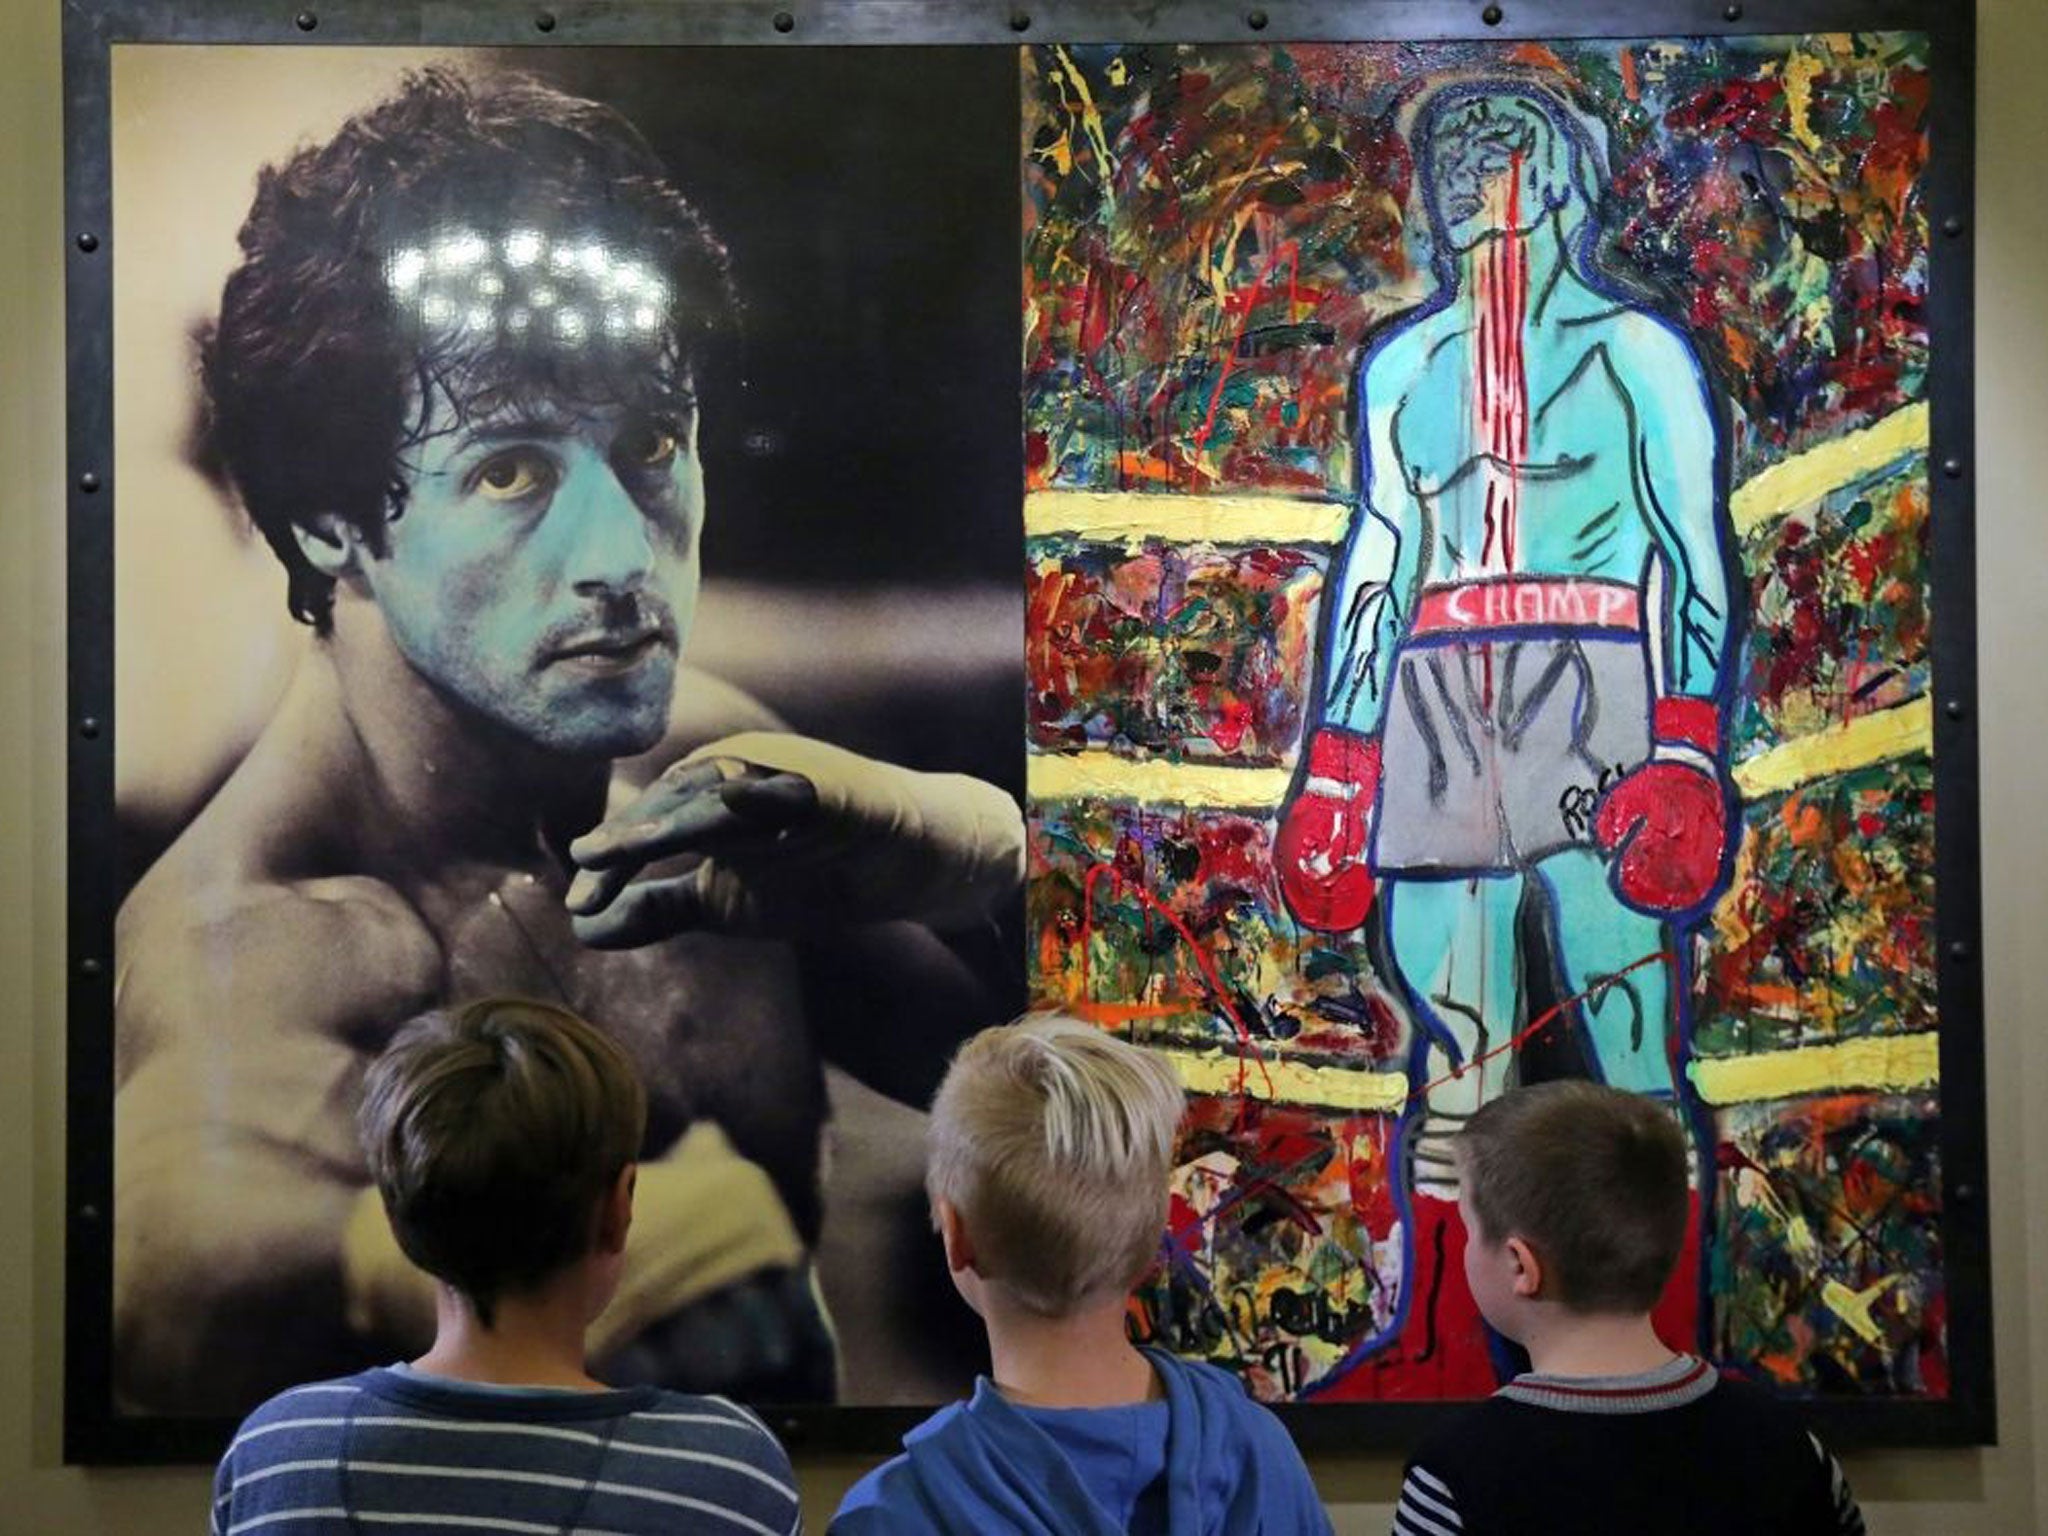 The exhibition by Sylvester Stallone, who has worked on his pieces for more than 30 years, consists of 36 paintings